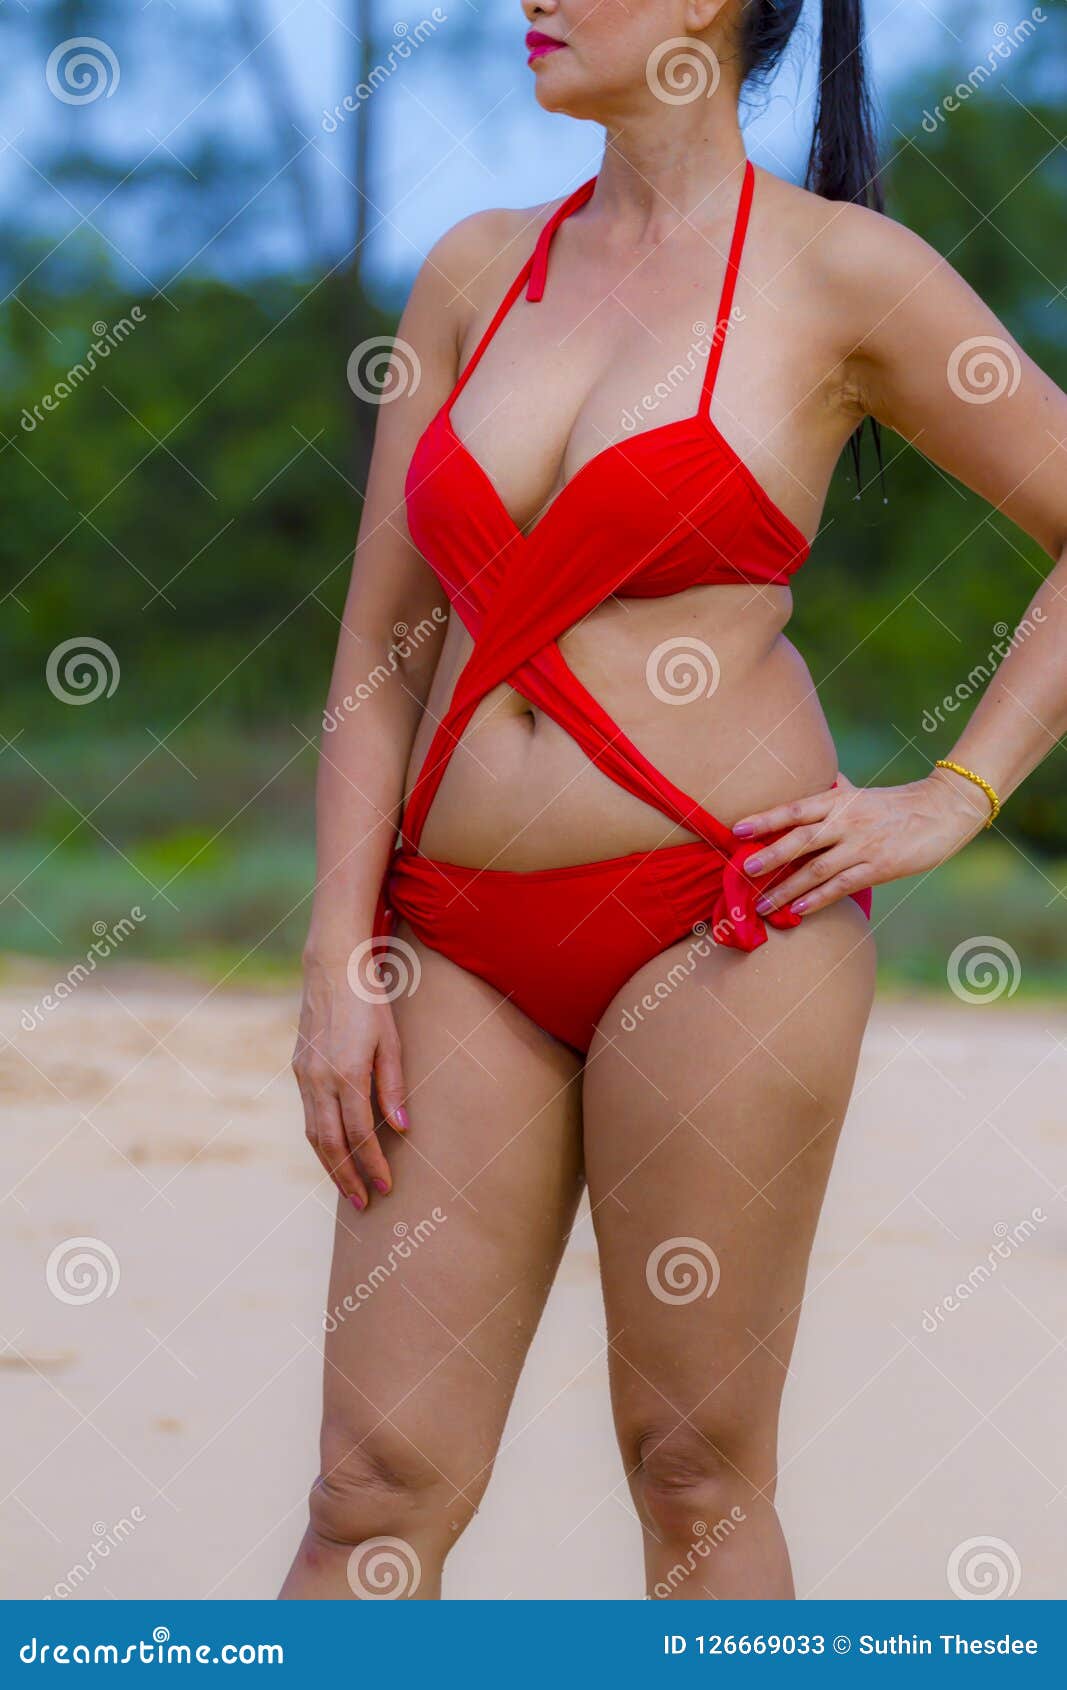 Woman with Shape Sex Symbol in Sunshine on Beach Stock Image